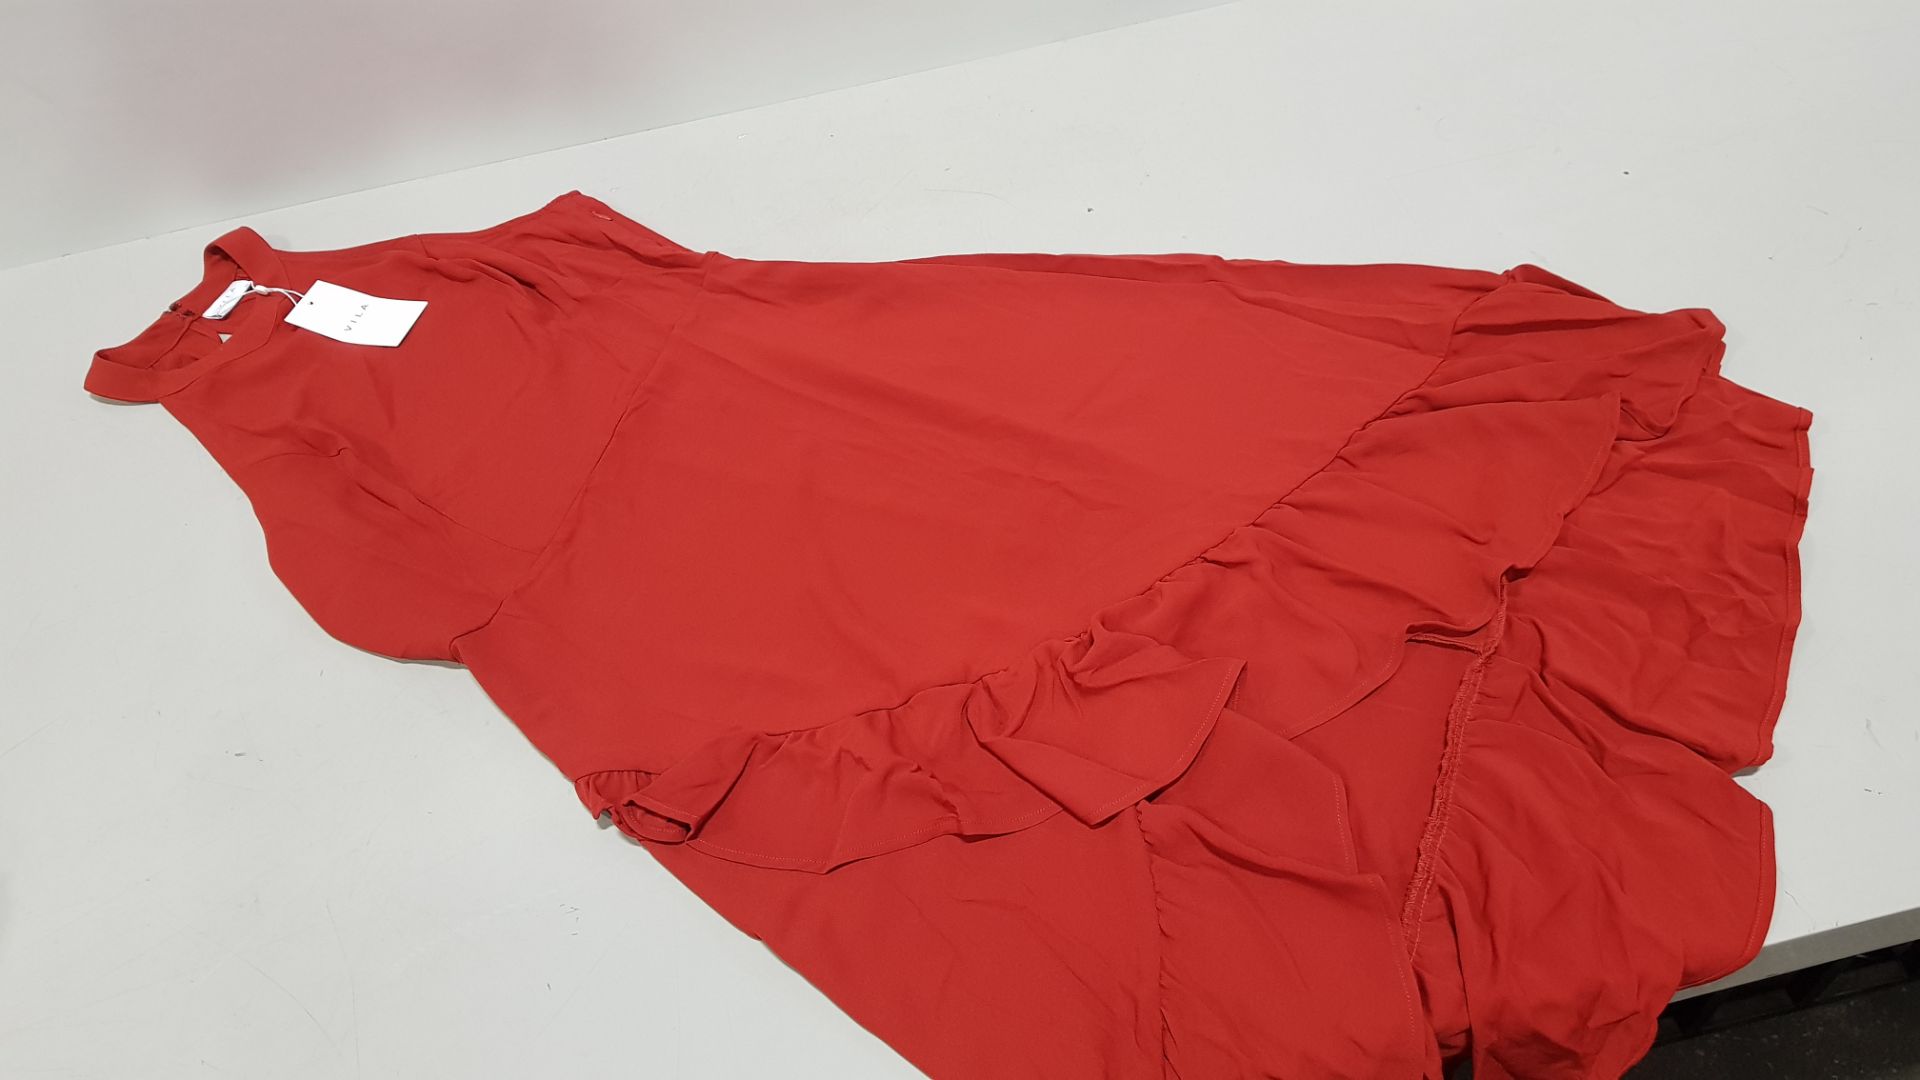 20 X BRAND NEW DOROTHY PERKINS VILA CLOTHES RED DRESSES IN SIZE LARGE